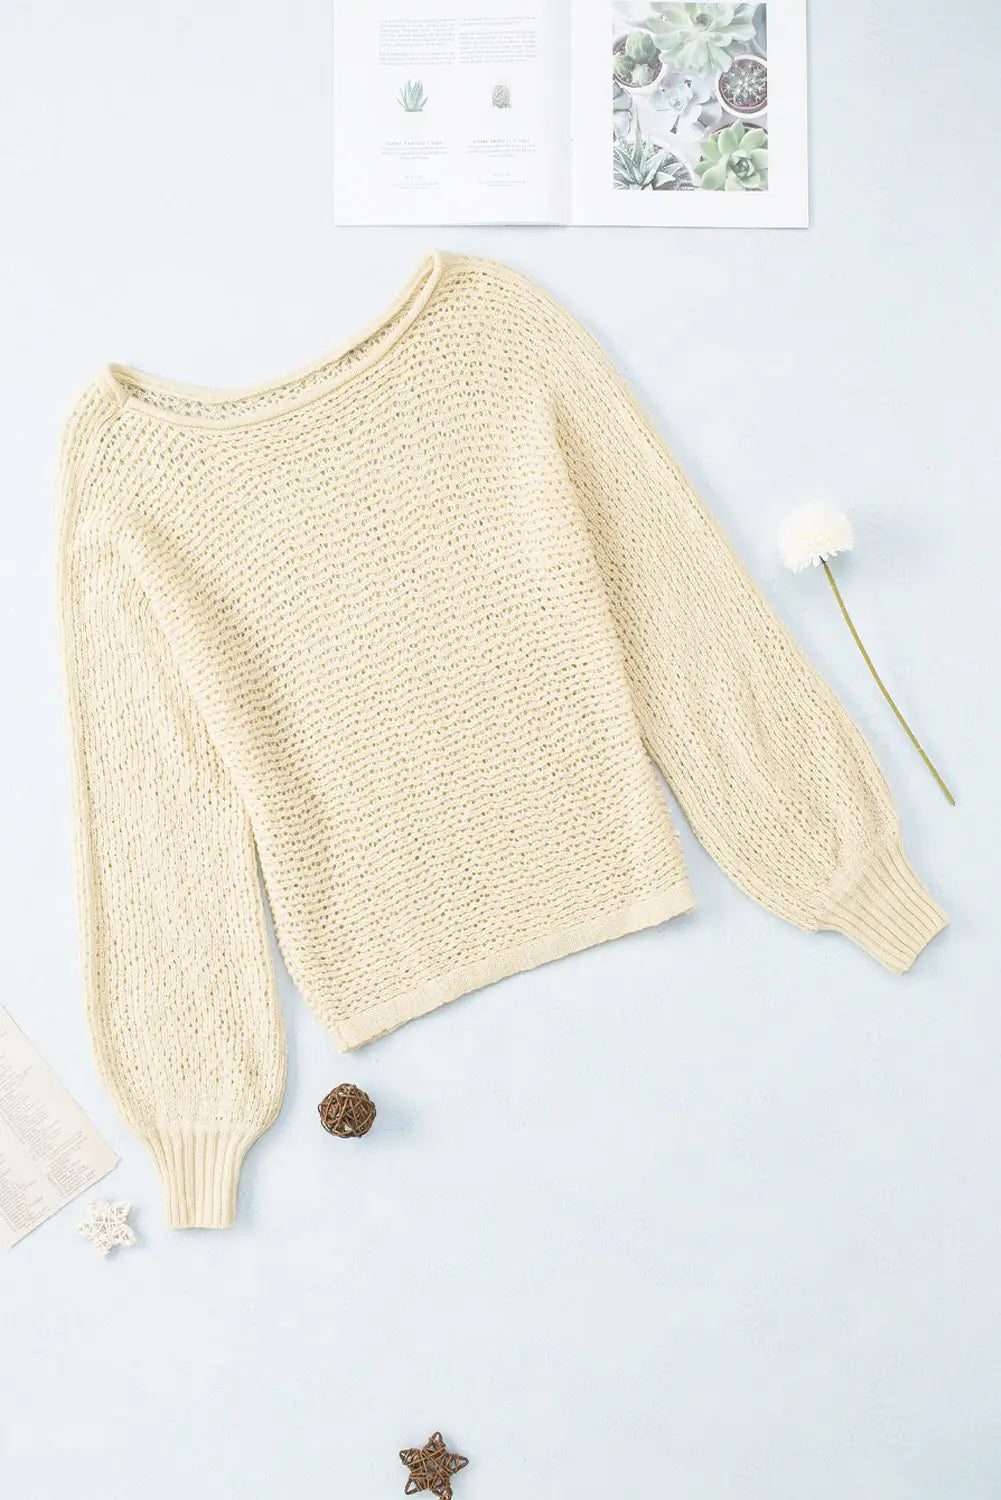 Apricot sheer openwork knit sweater - tops